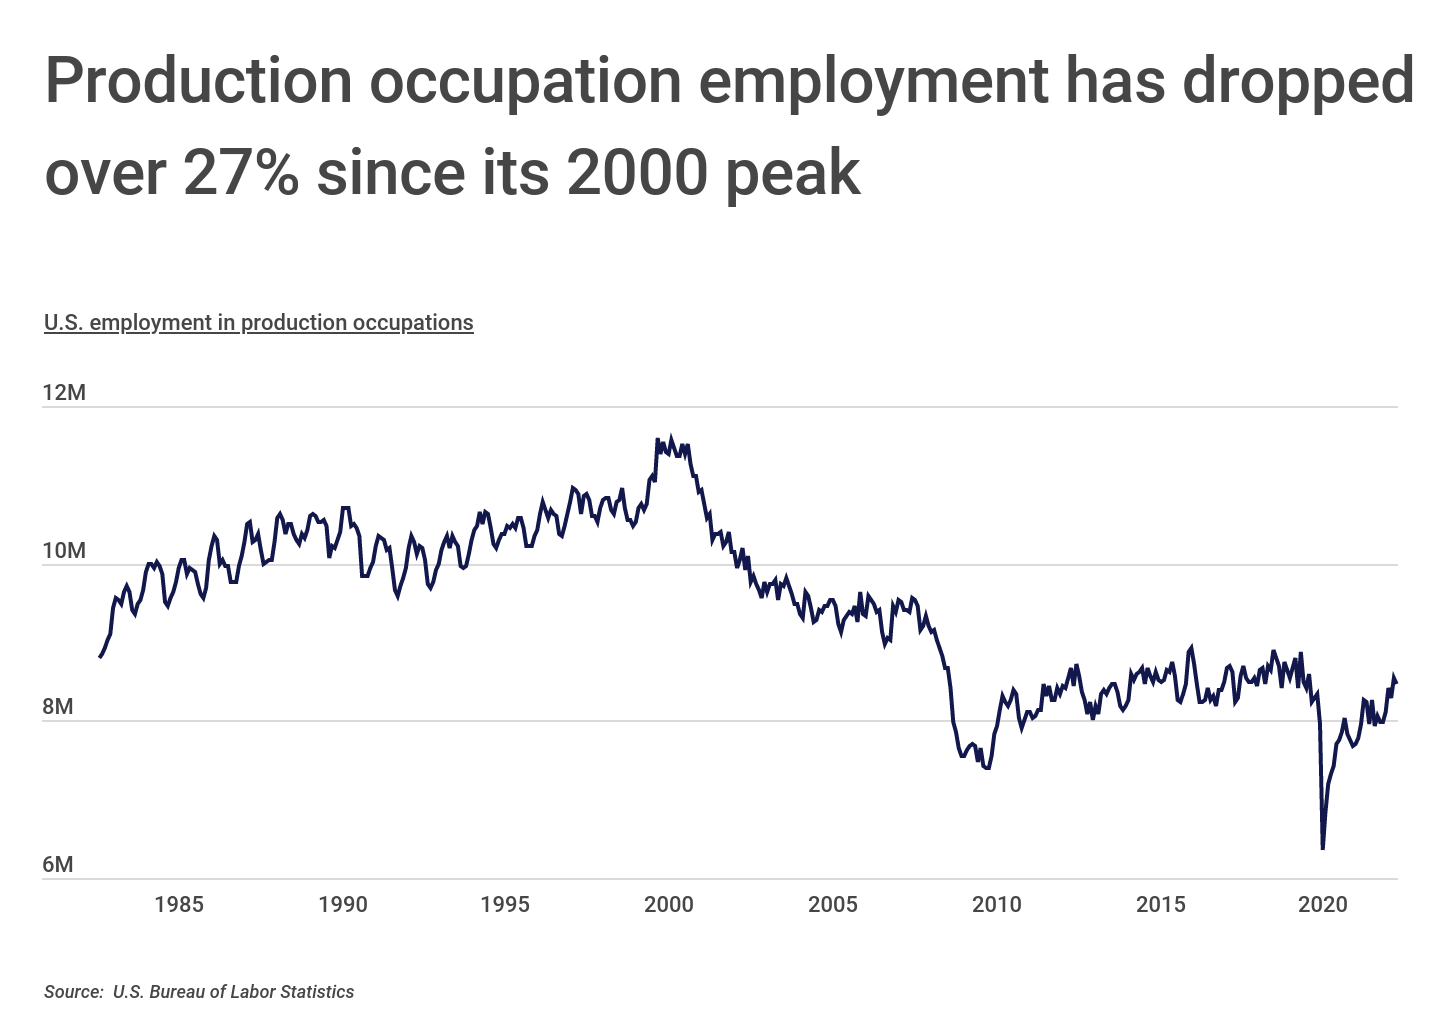 Chart1_Production occupation employment has dropped 27%+ since its 2000 peak